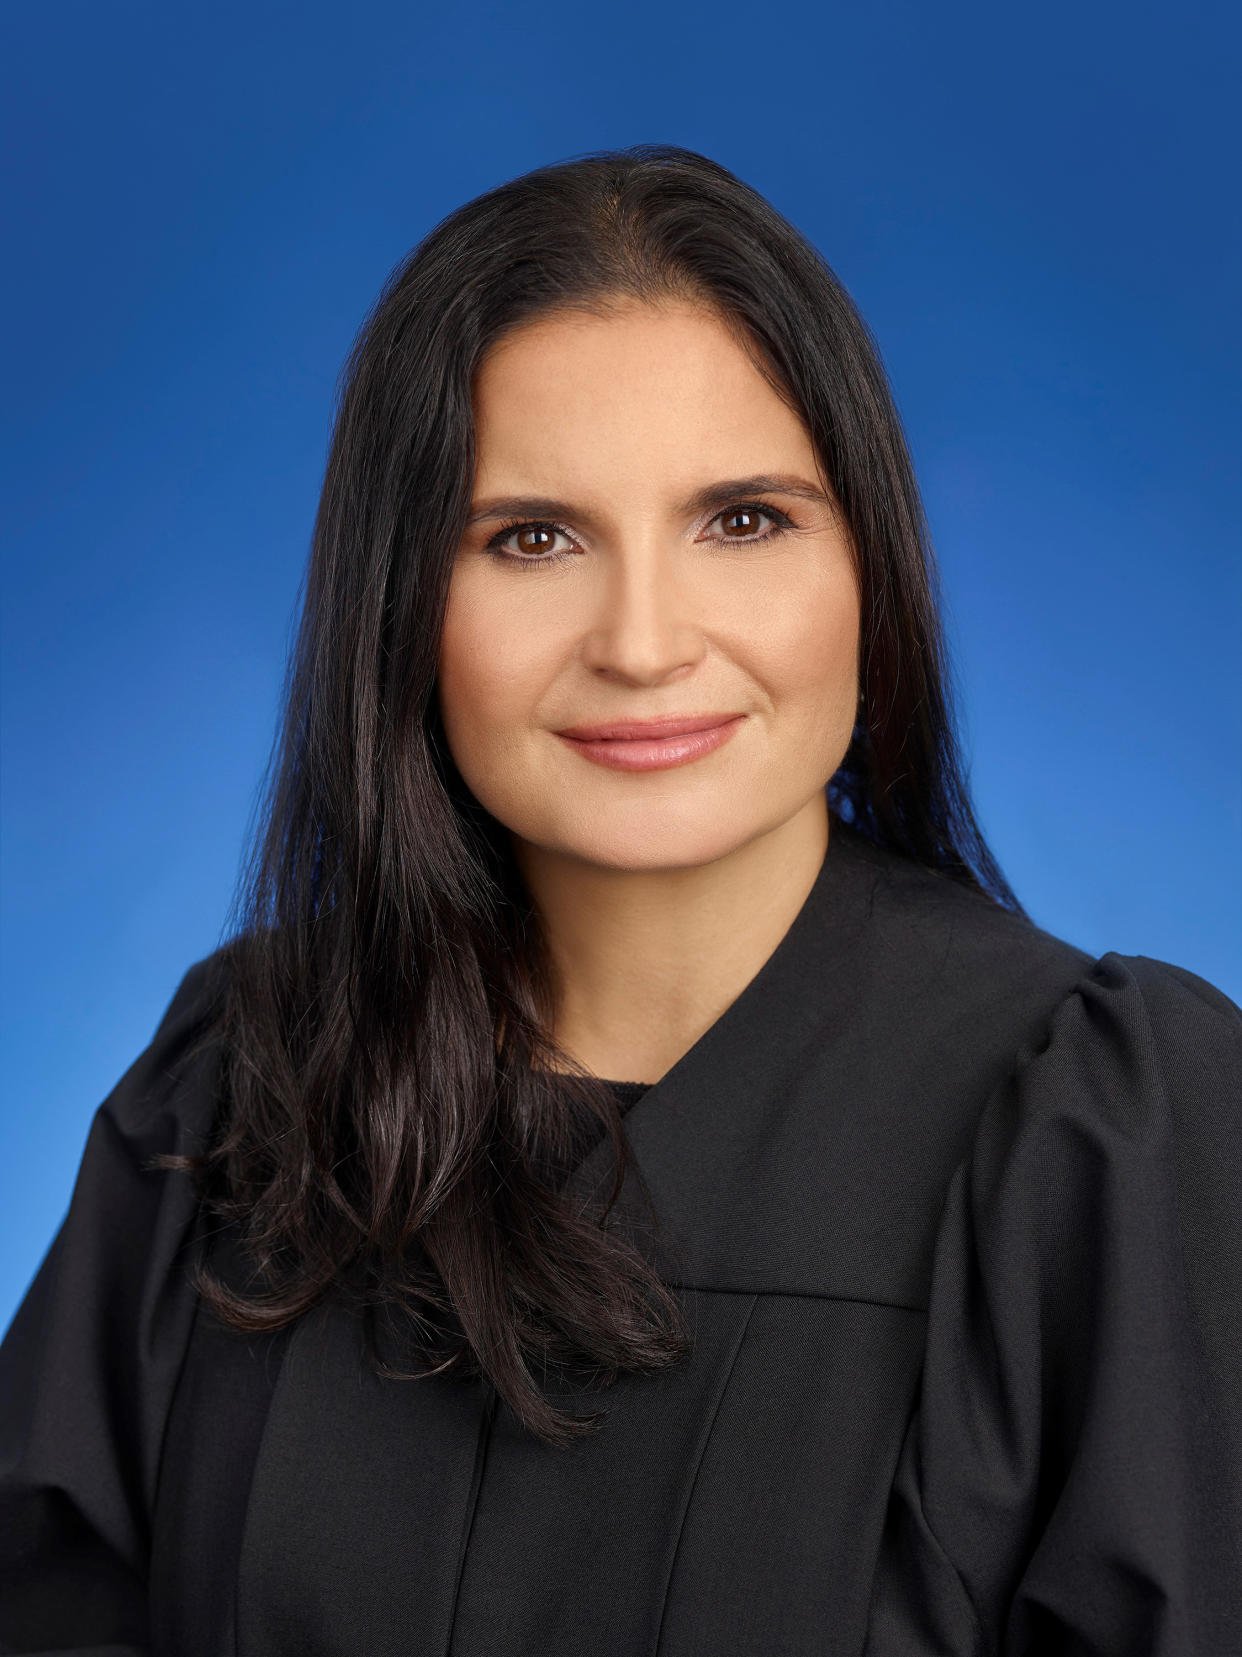 In an undated image provided by the Southern District of Florida, Judge Aileen M. Cannon. (Southern District of Florida via The New York Times)